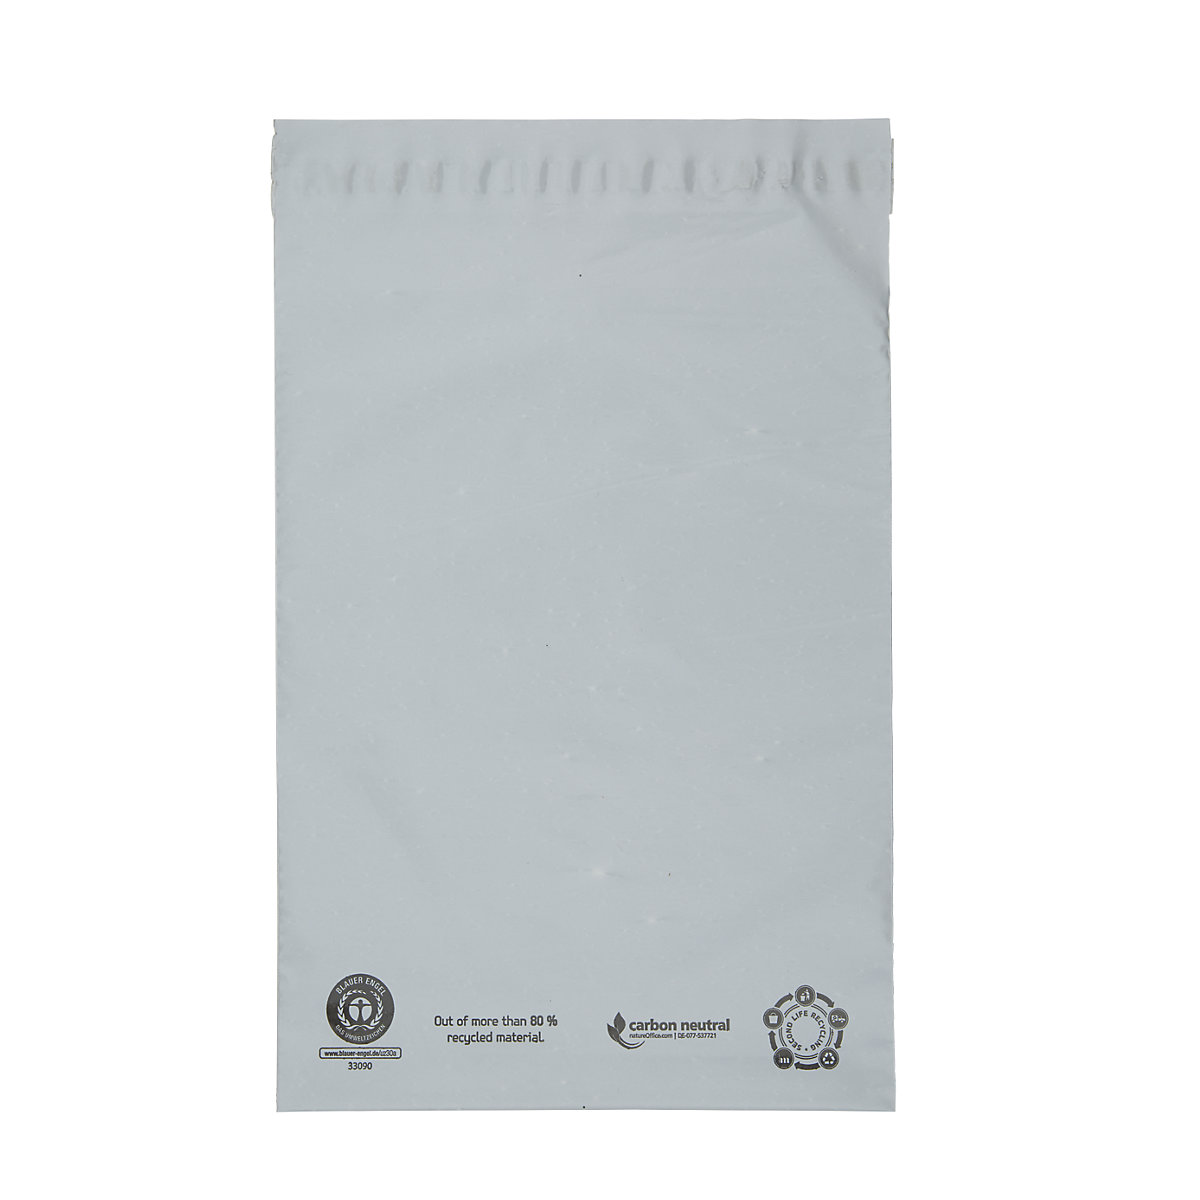 Dispatch bag, non-transparent, film thickness 60 µm, LxW 220 x 165 mm, pack of 1000-2